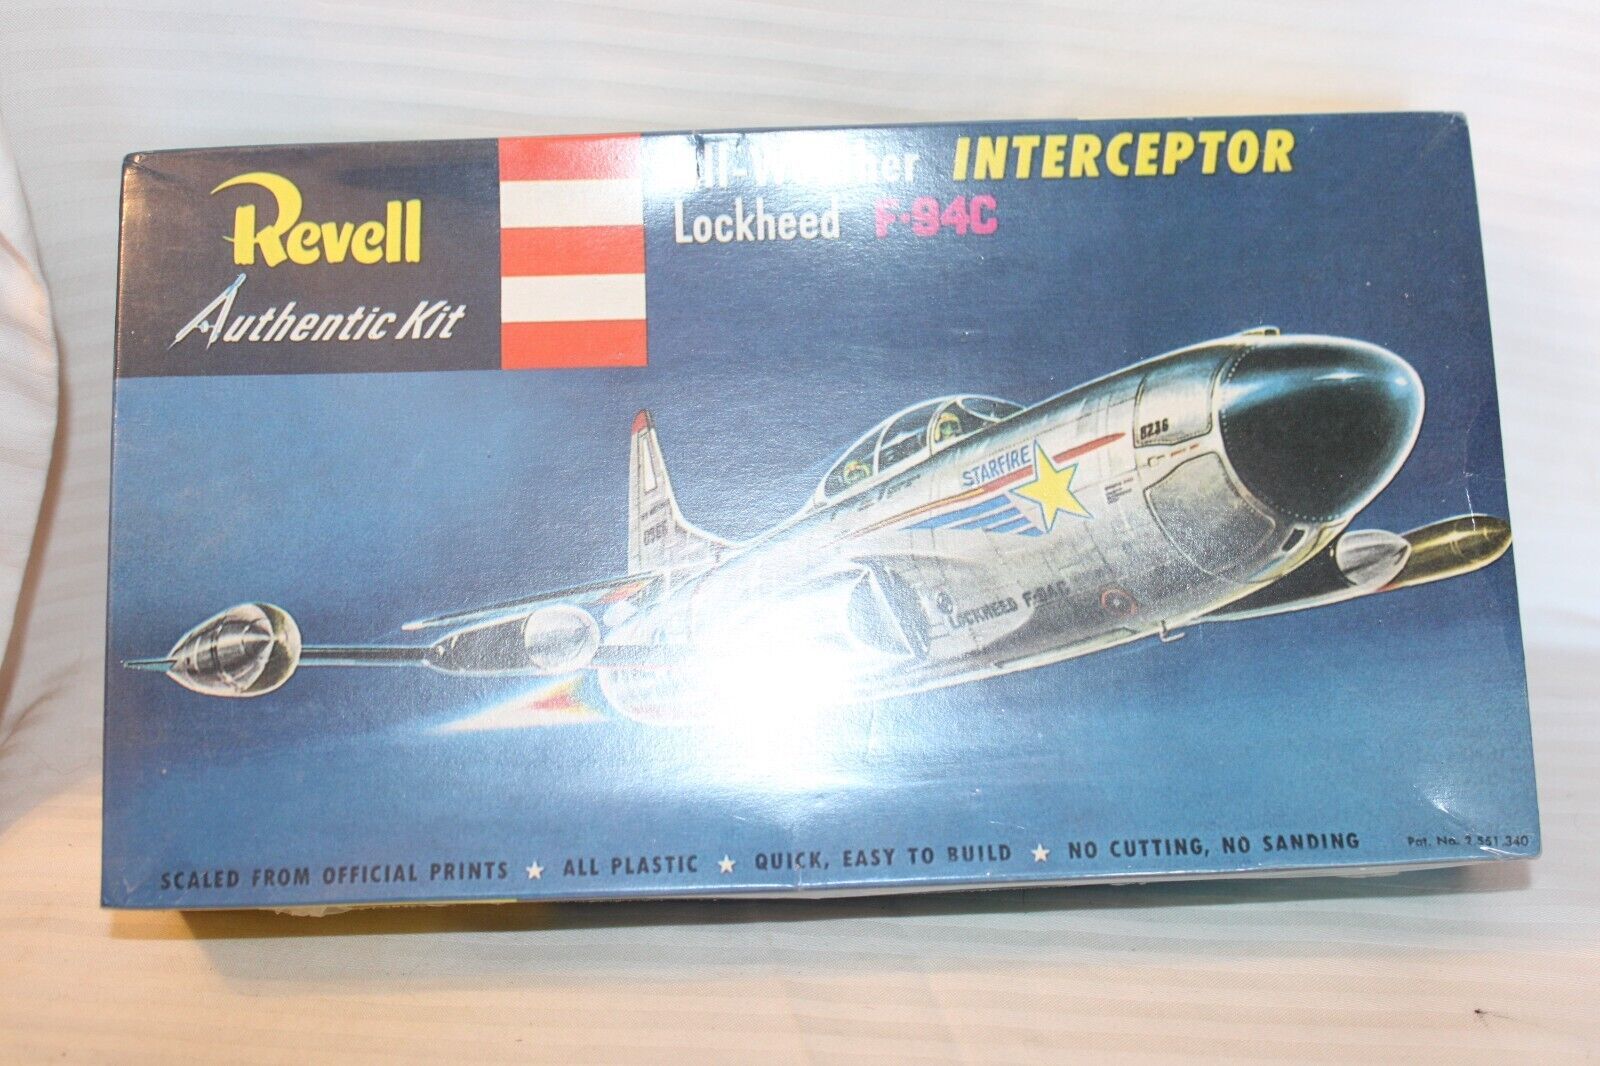 Primary image for 1/56 Scale Revell, Lockheed F-94C Interceptor Airplane Kit, #H-210 BN Sealed